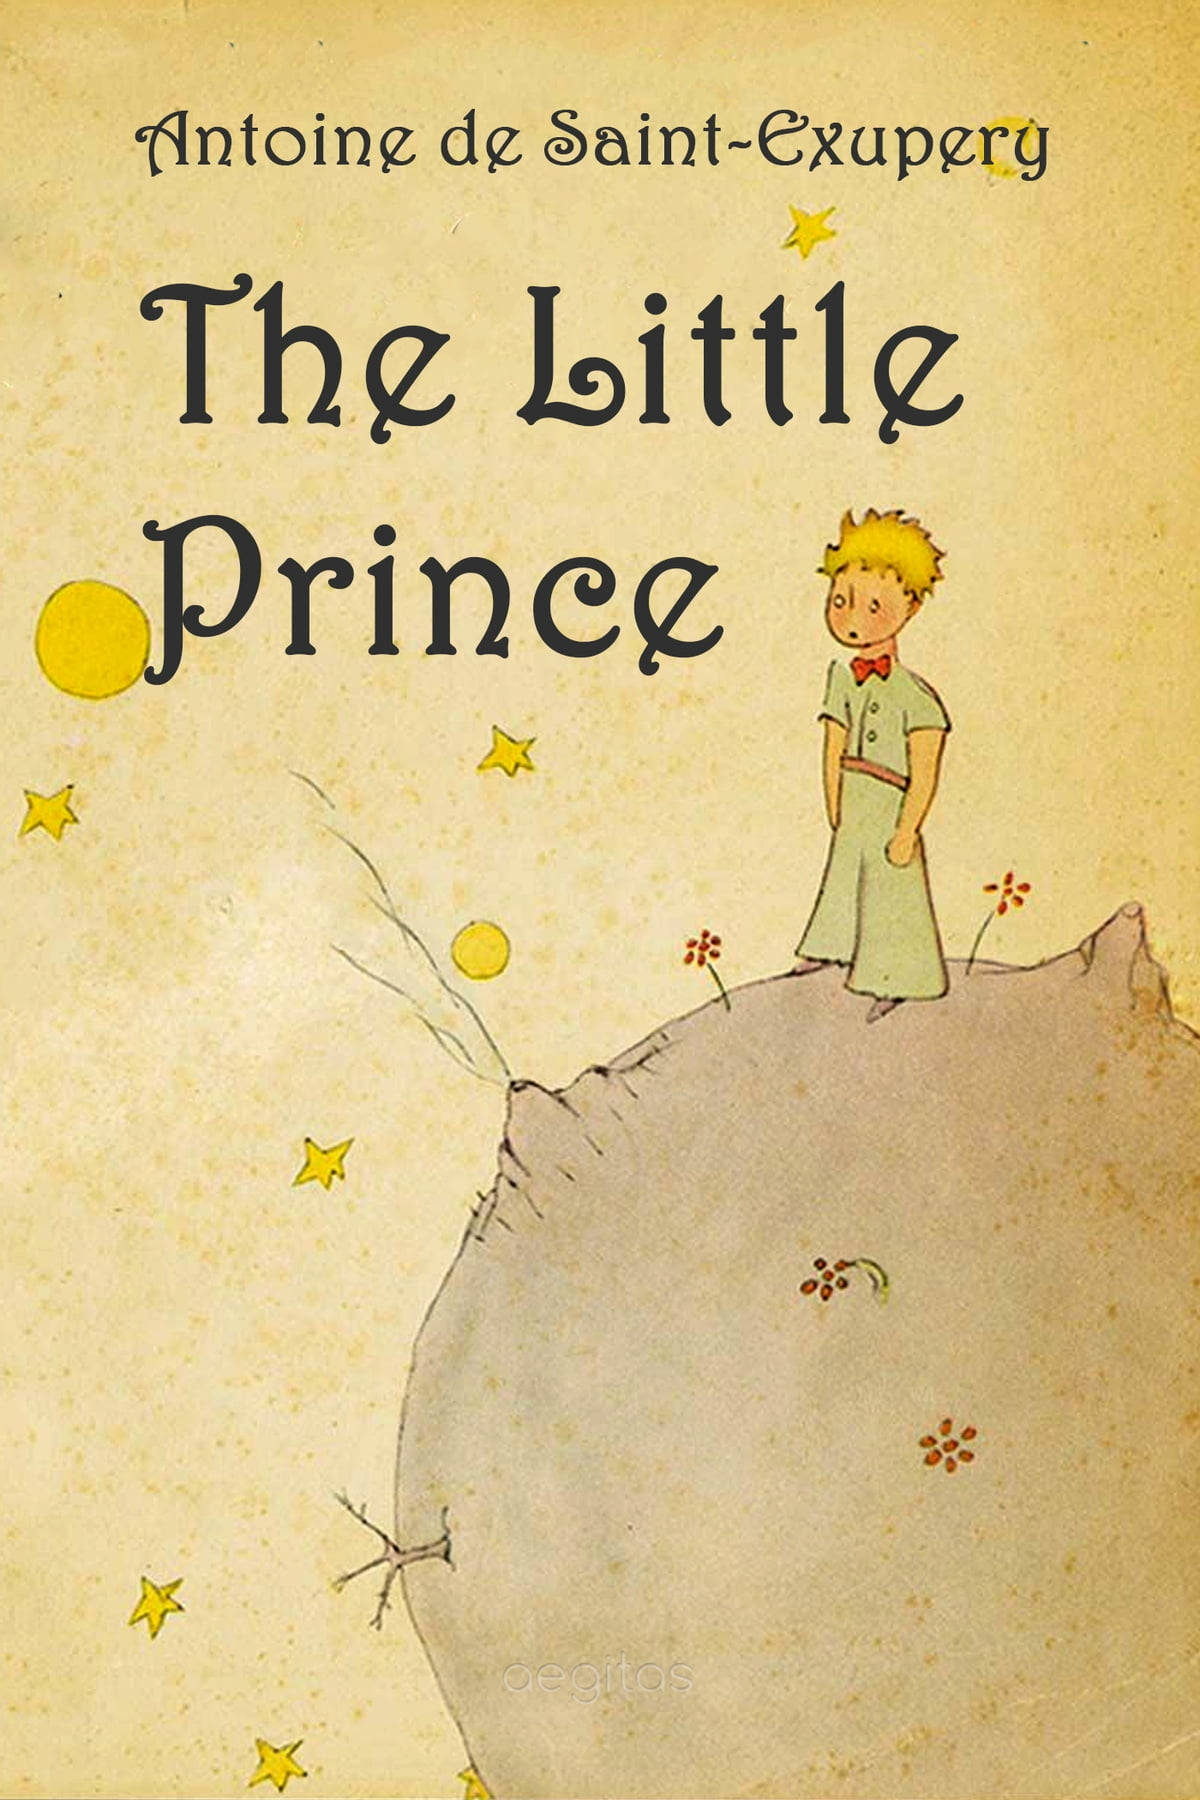 100-the-little-prince-wallpapers-wallpapers